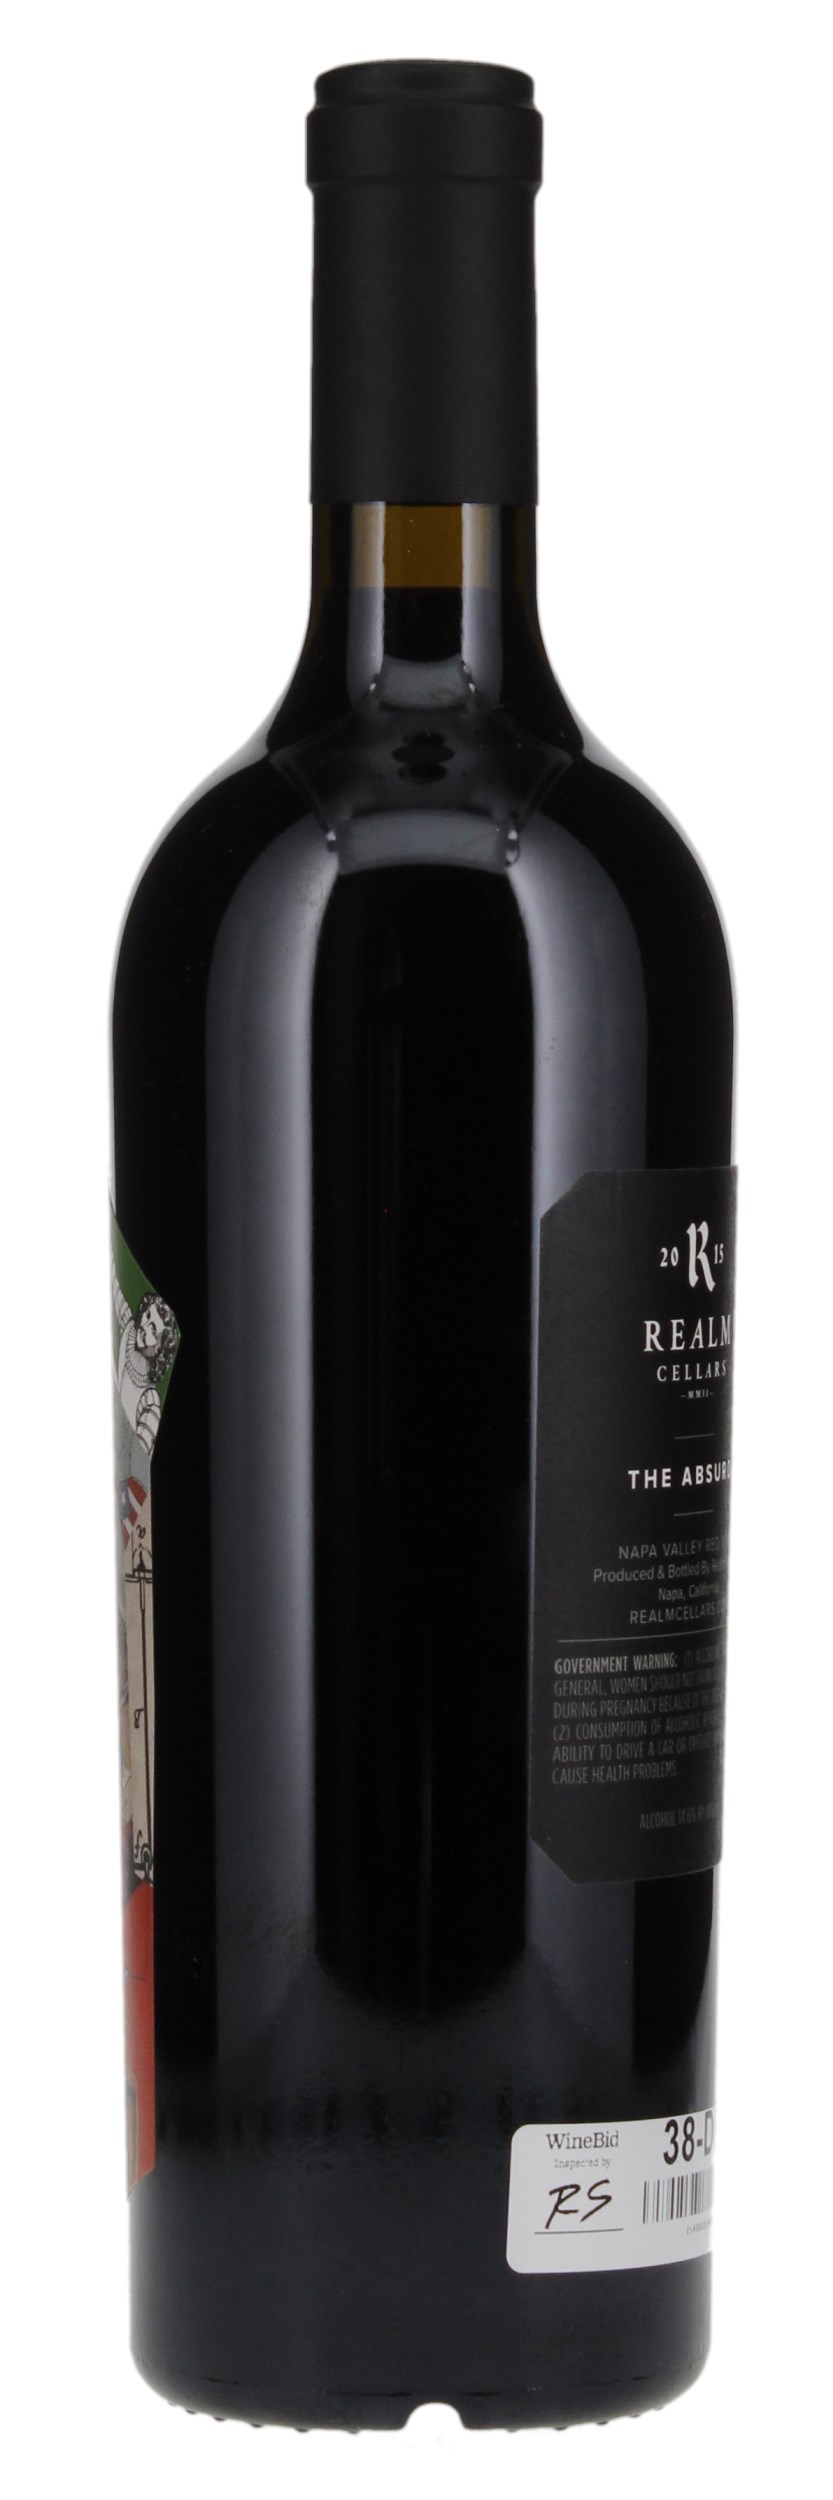 2015 Realm The Absurd, 750ml